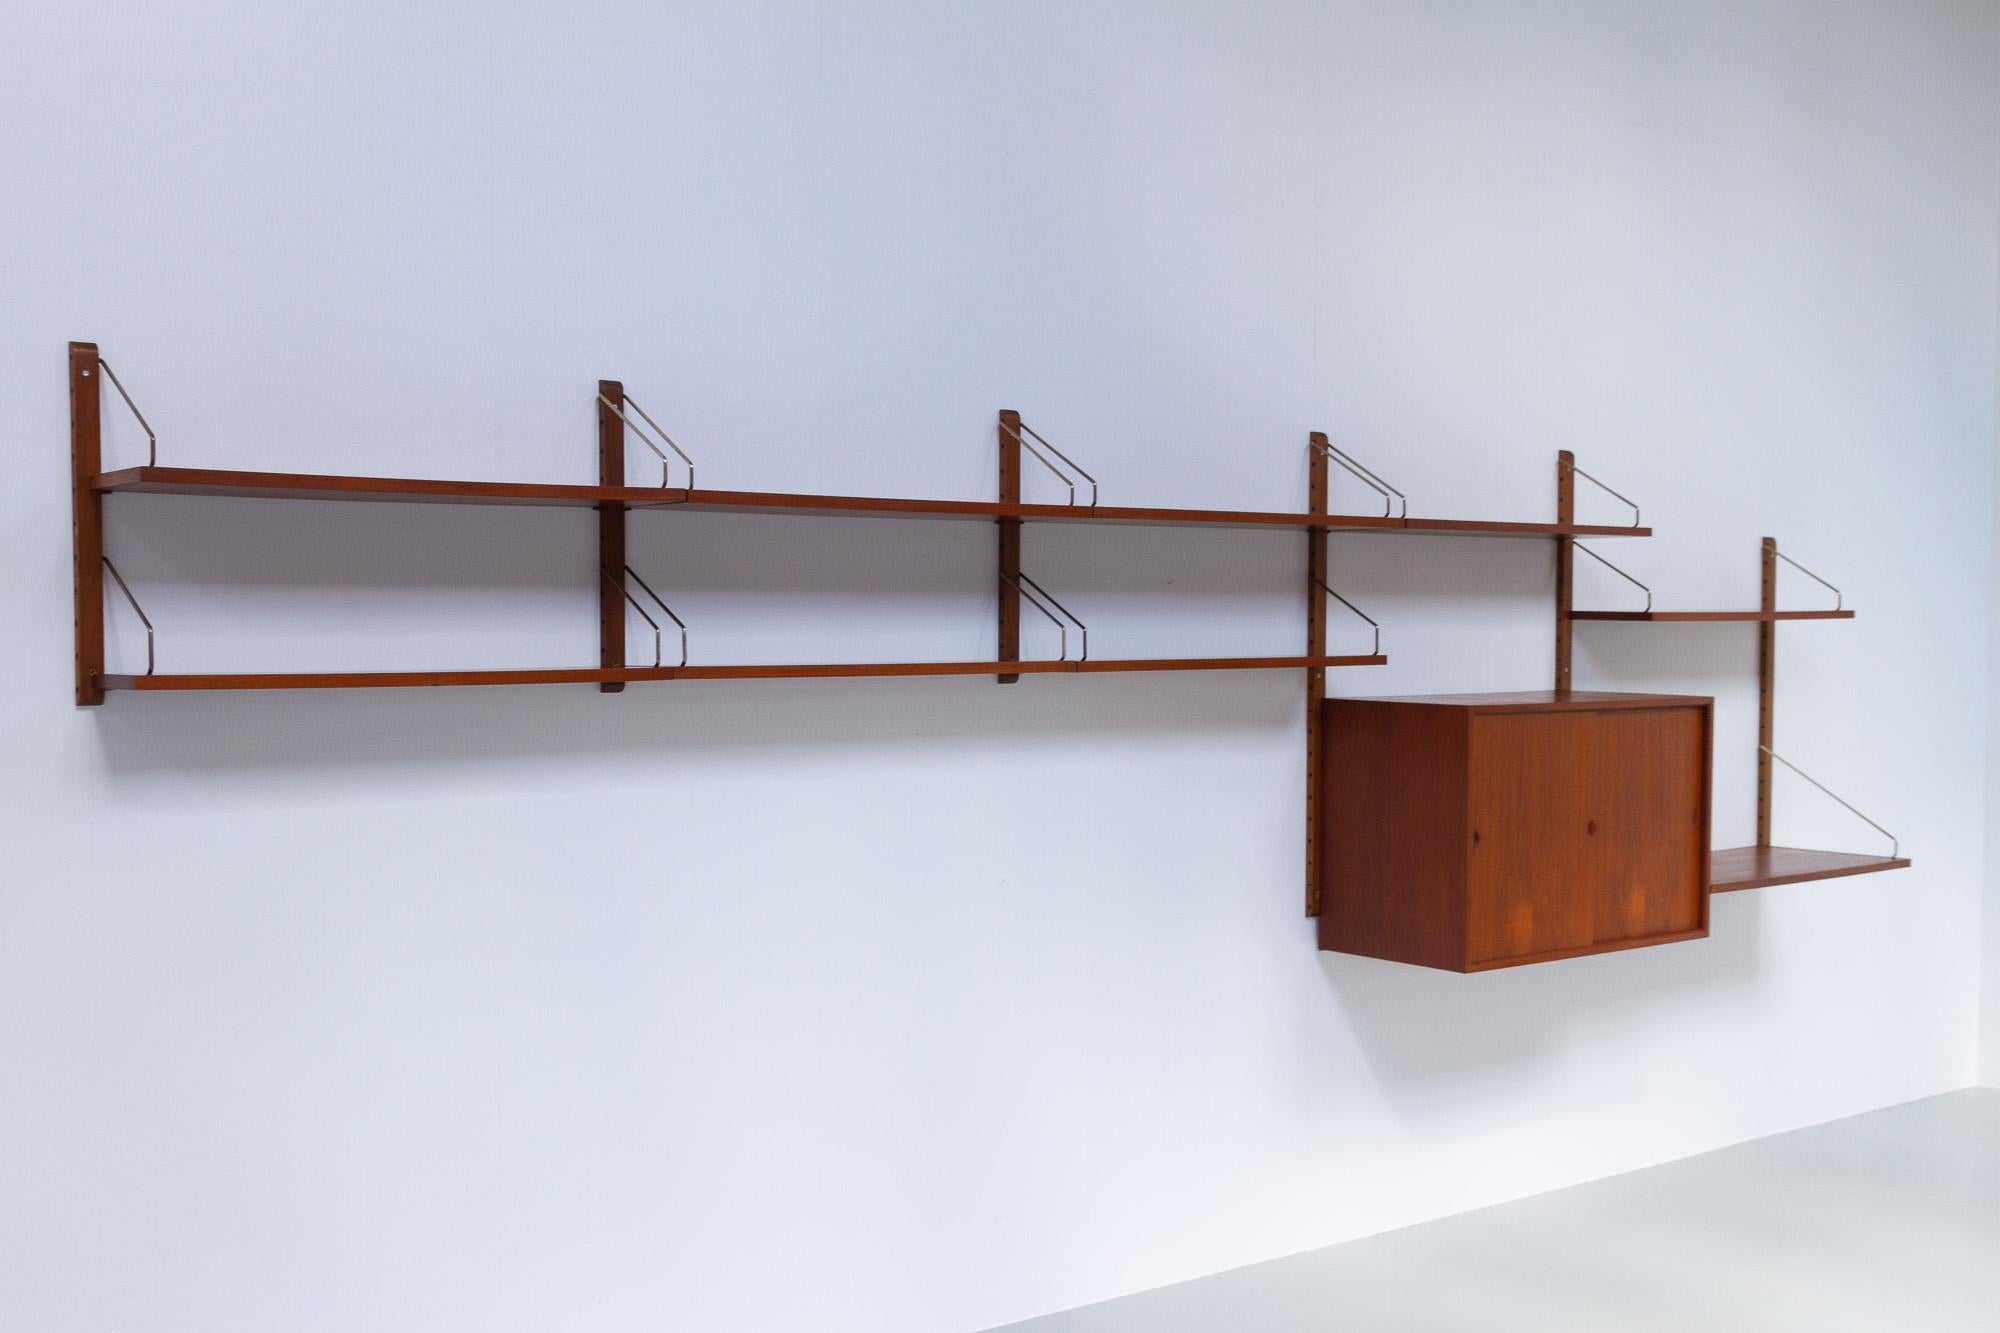 Vintage Danish teak wall unit by Poul Cadovius for Cado, 1950s.

Mid-Century Modern 5 bay shelving system model Royal. This is a original vintage floating bookcase designed in 1948 by Danish architect Poul Cadovius. 
Cadovius had the revolutionary